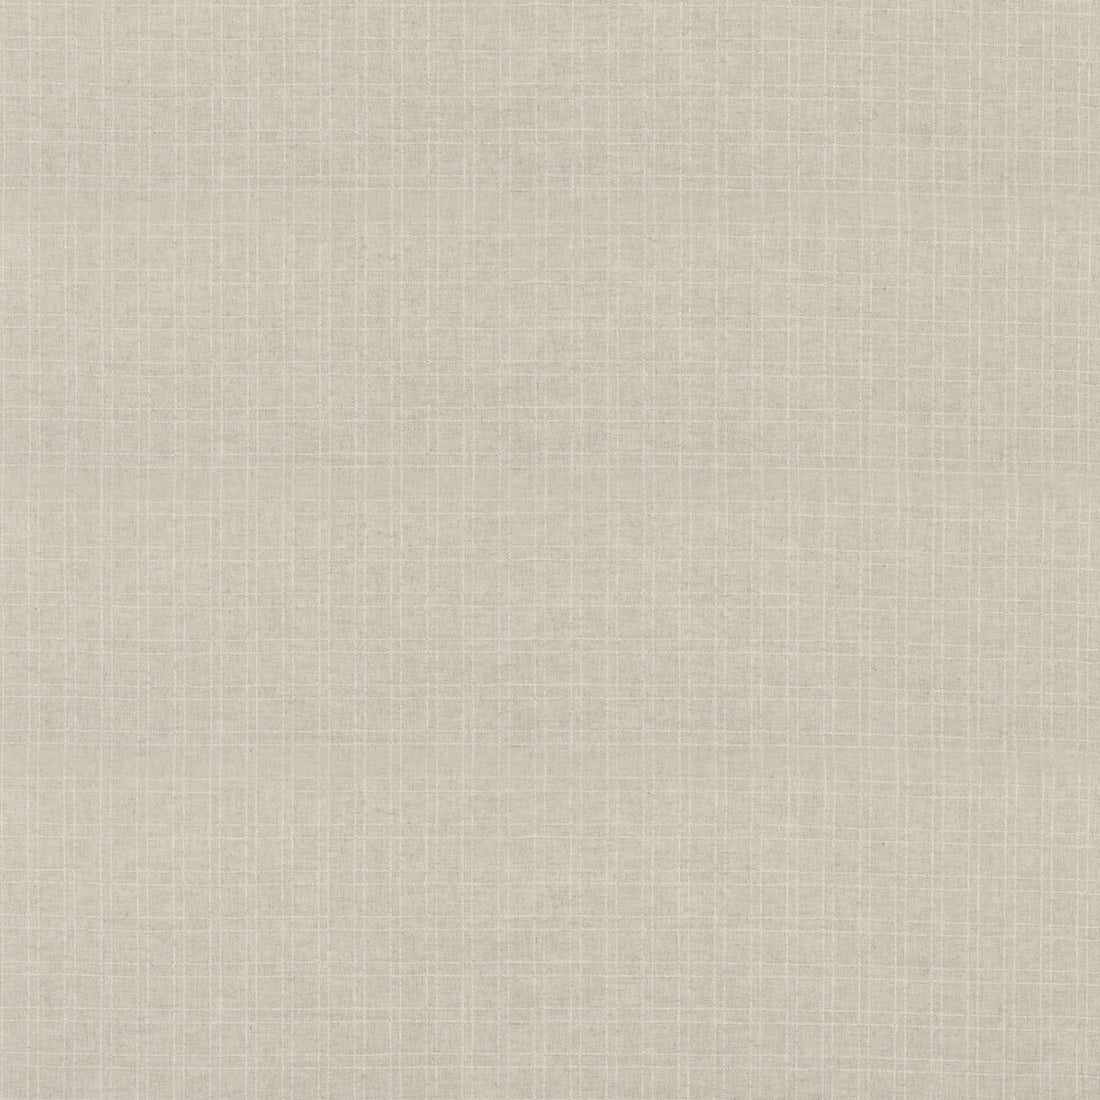 Bulsa fabric in parchment color - pattern ED85401.225.0 - by Threads in the Quintessential Naturals collection